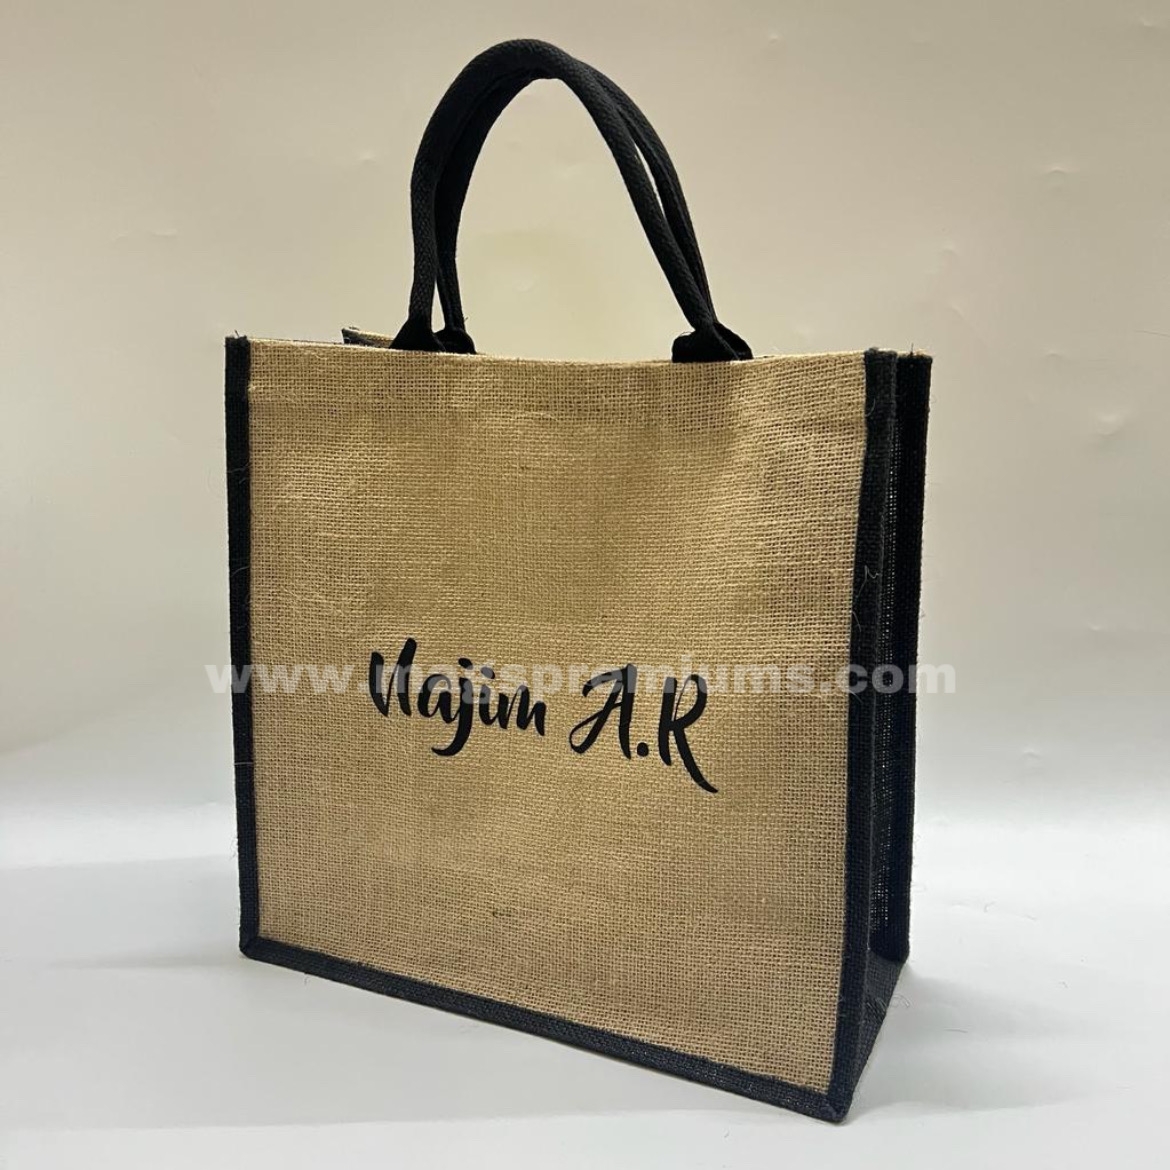 Printed Jute Bags In Saharanpur - Prices, Manufacturers & Suppliers